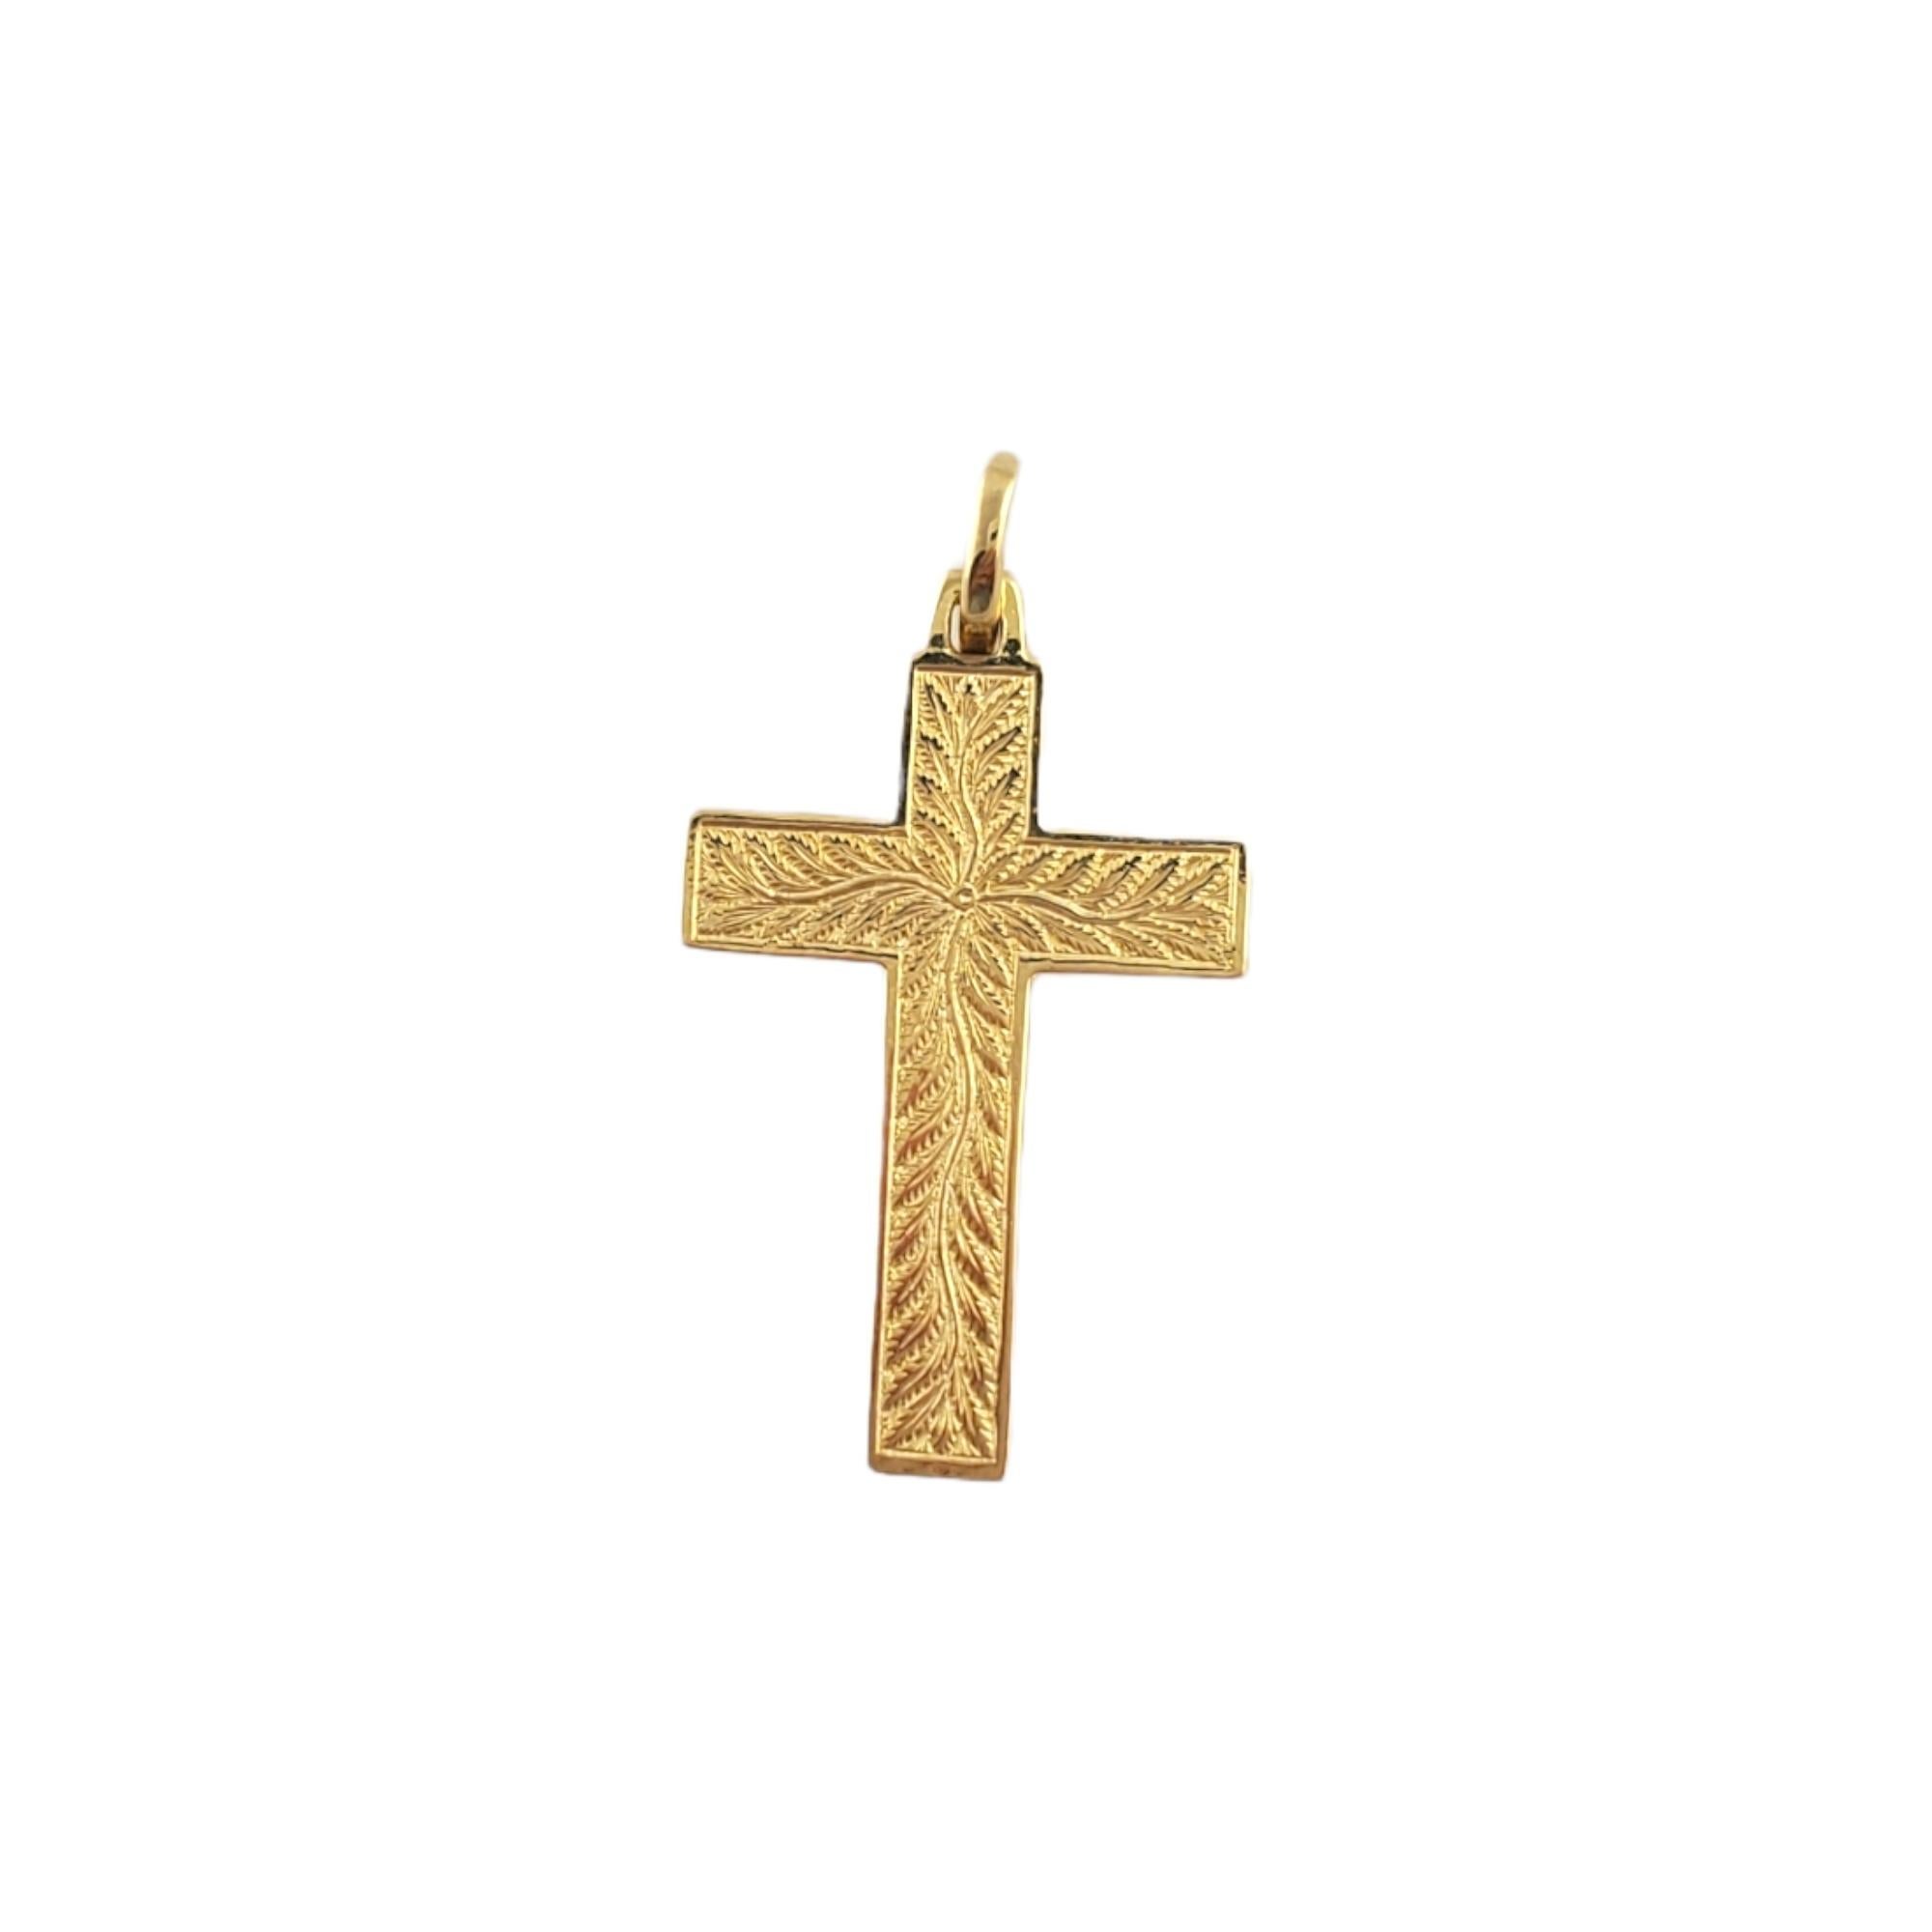 18K Yellow Gold Crucifix Pendant

This meticulously detailed cross pendant features a depiction of the crucifix in 18K yellow gold.

Size: 21.47 mm X 13.44 mm

Weight: 1.6 gr/ 1.0 dwt

Hallmark: 750

Very good condition, professionally